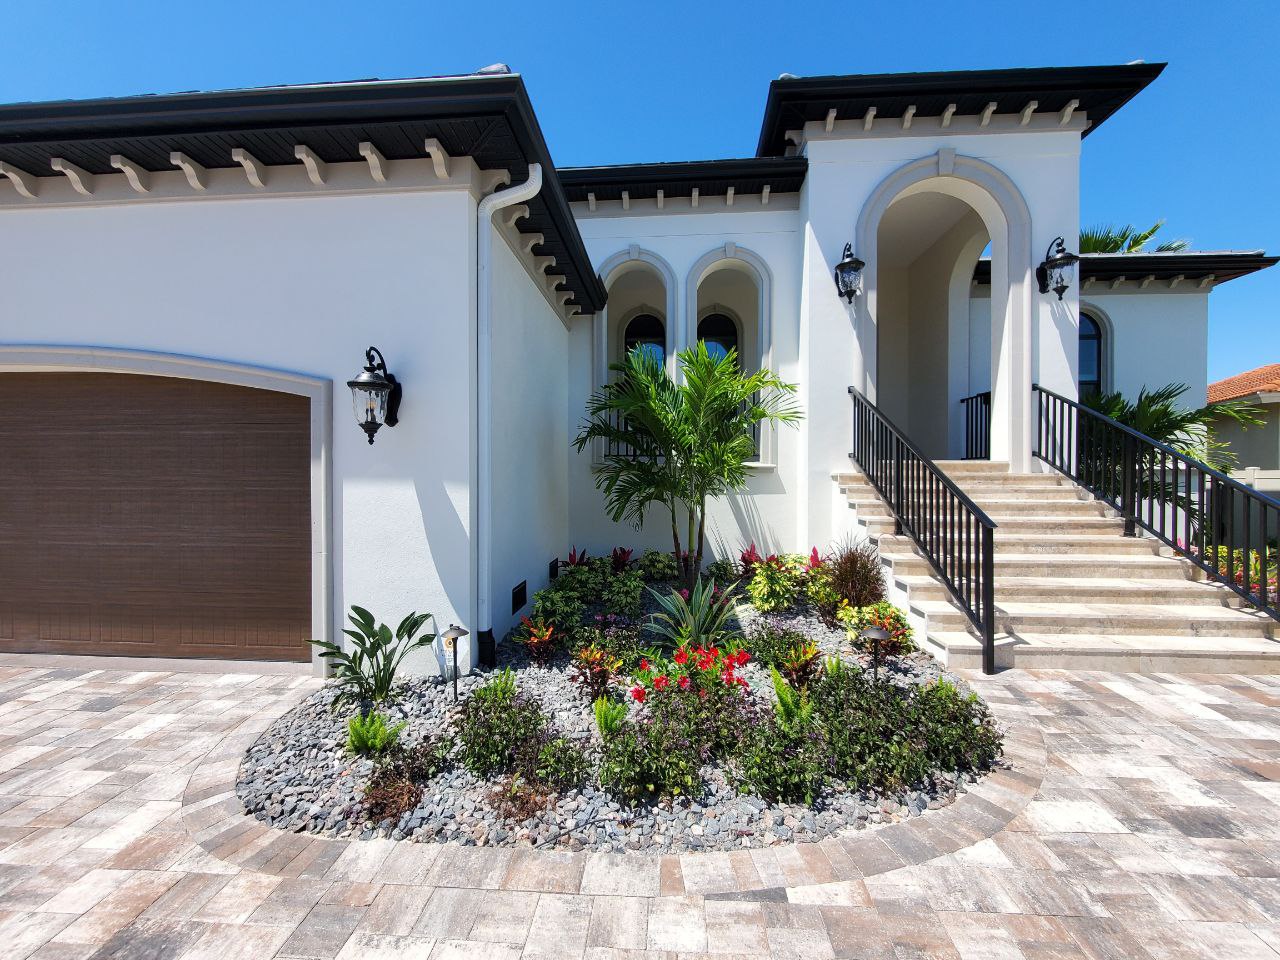 Professional Landscapers In Tampa Fl - Pavers